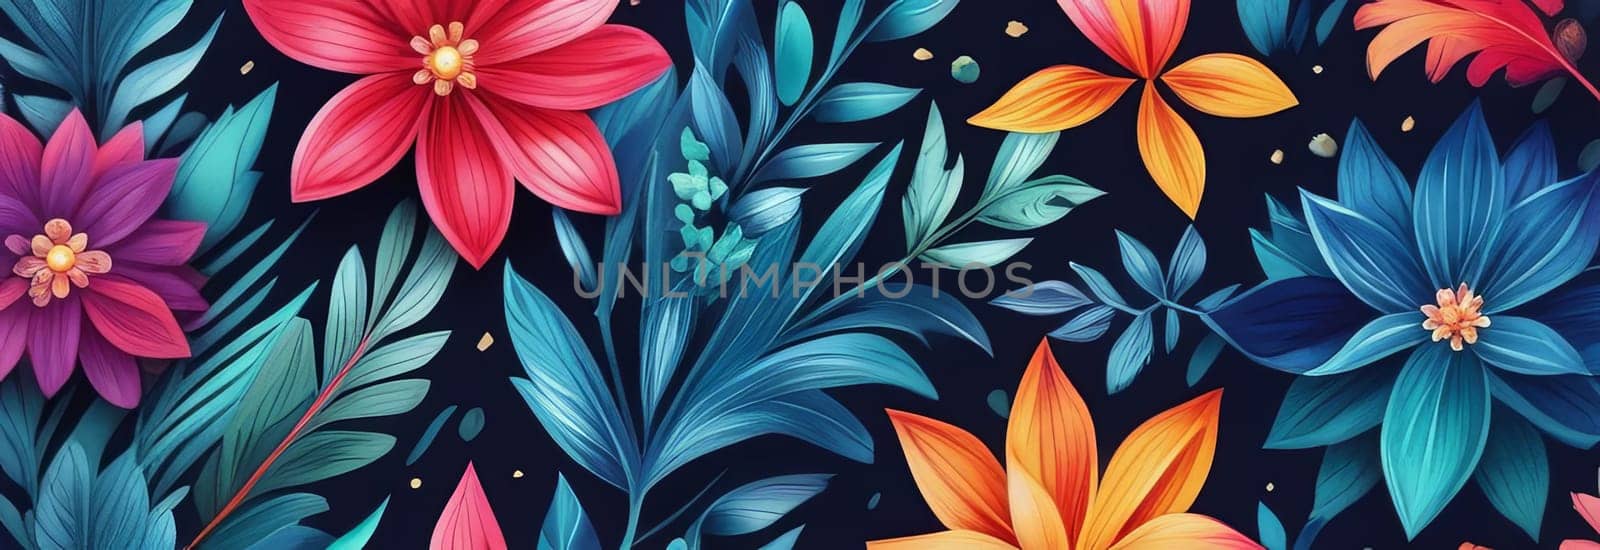 Image features striking contrast between vivid colors of flowers, dark backdrop, creating visually appealing, dramatic composition. For interior design, textiles, clothing, gift wrapping, web design. by Angelsmoon